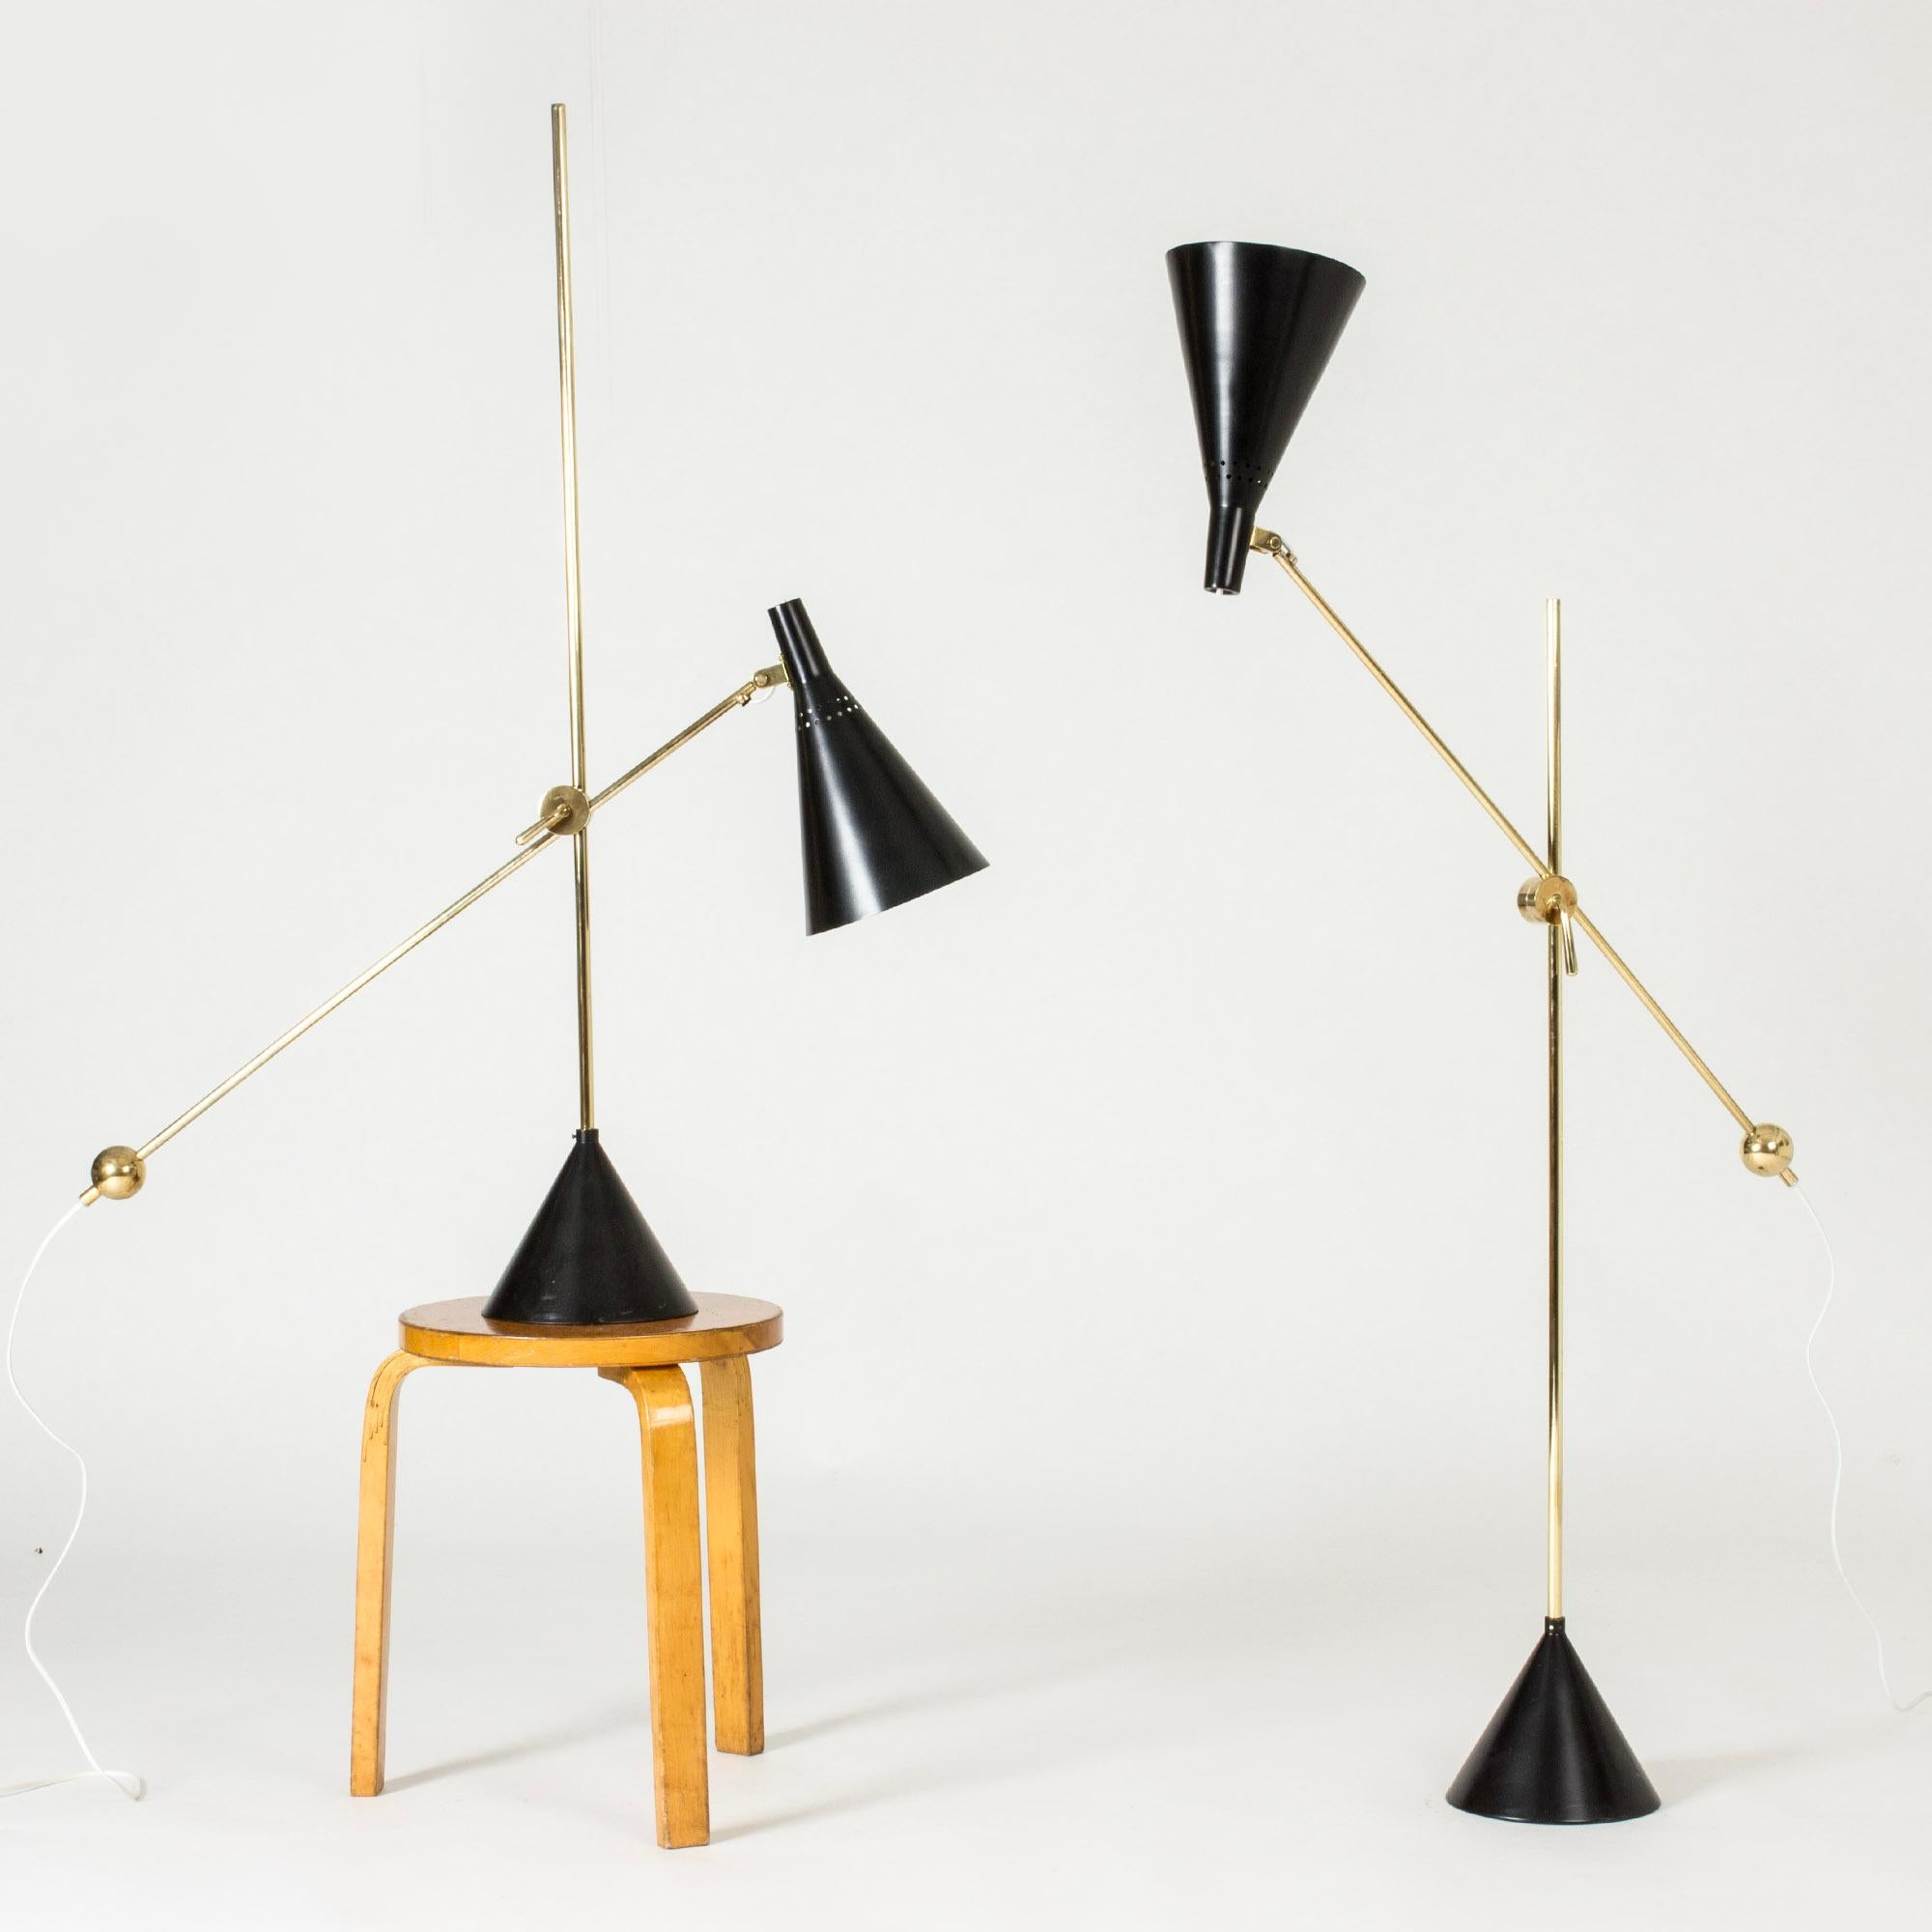 Finnish Pair of Midcentury Brass Floor Lamps by Tapio Wirkkala for Idman Oy For Sale